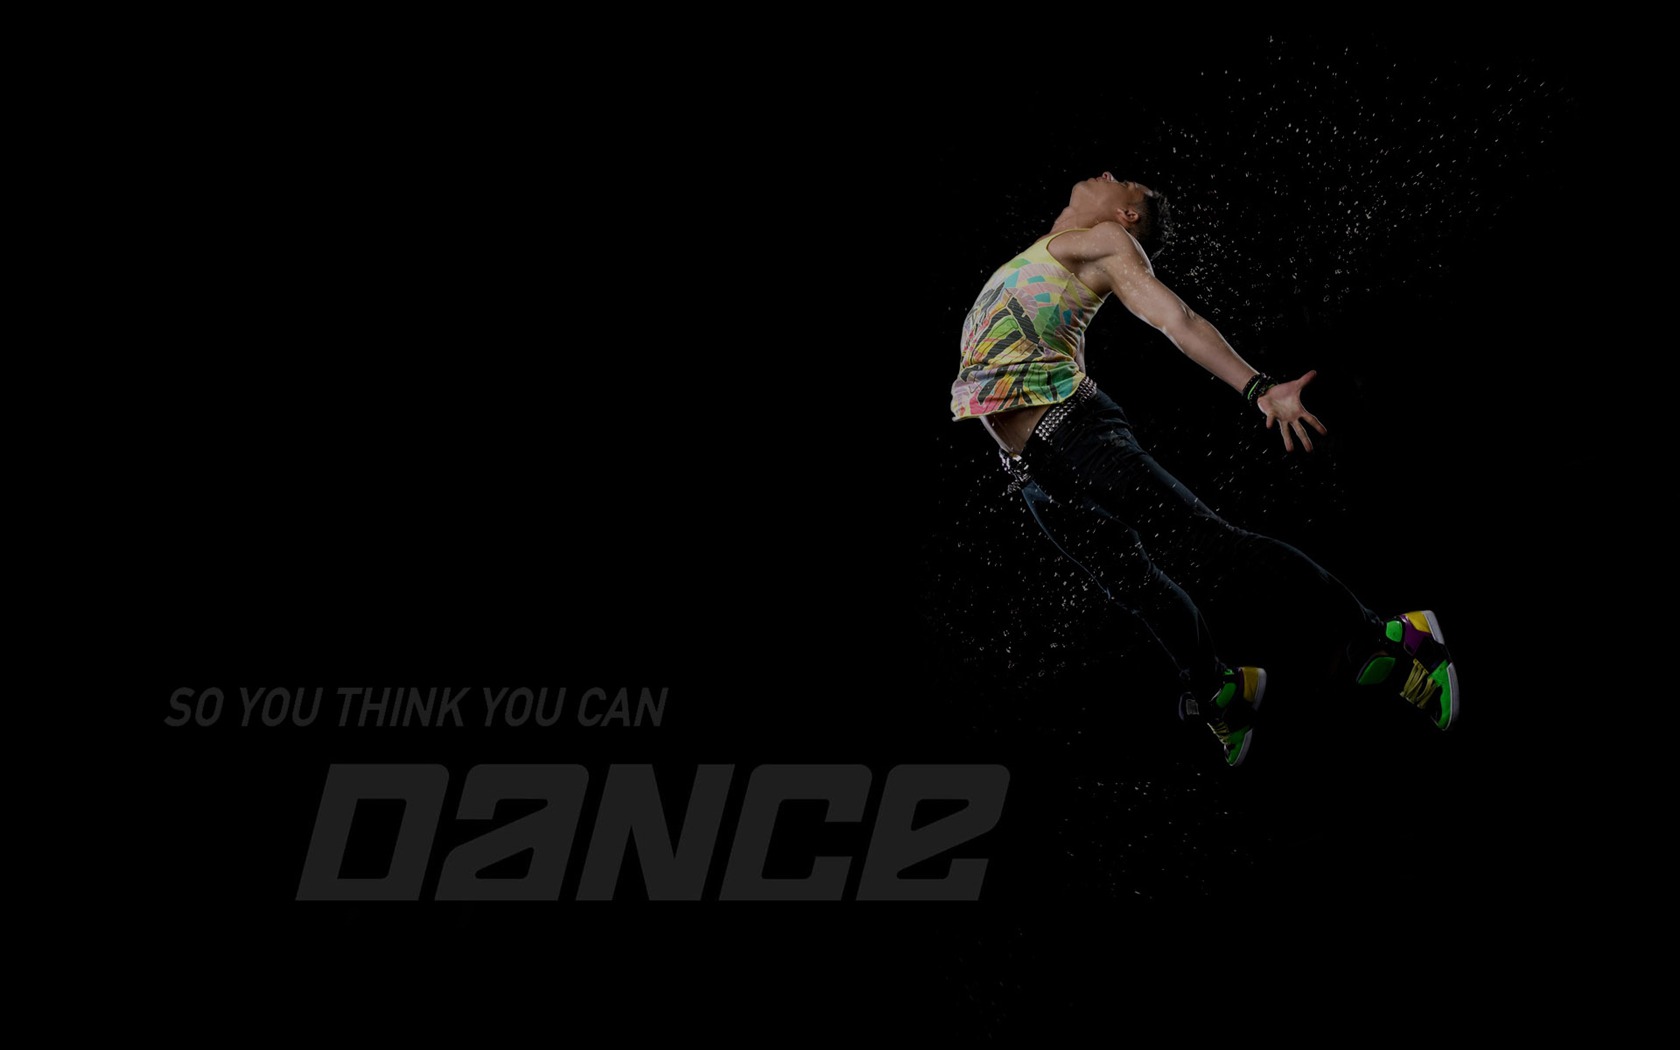 So You Think You Can Dance 舞林爭霸壁紙(二) #6 - 1680x1050